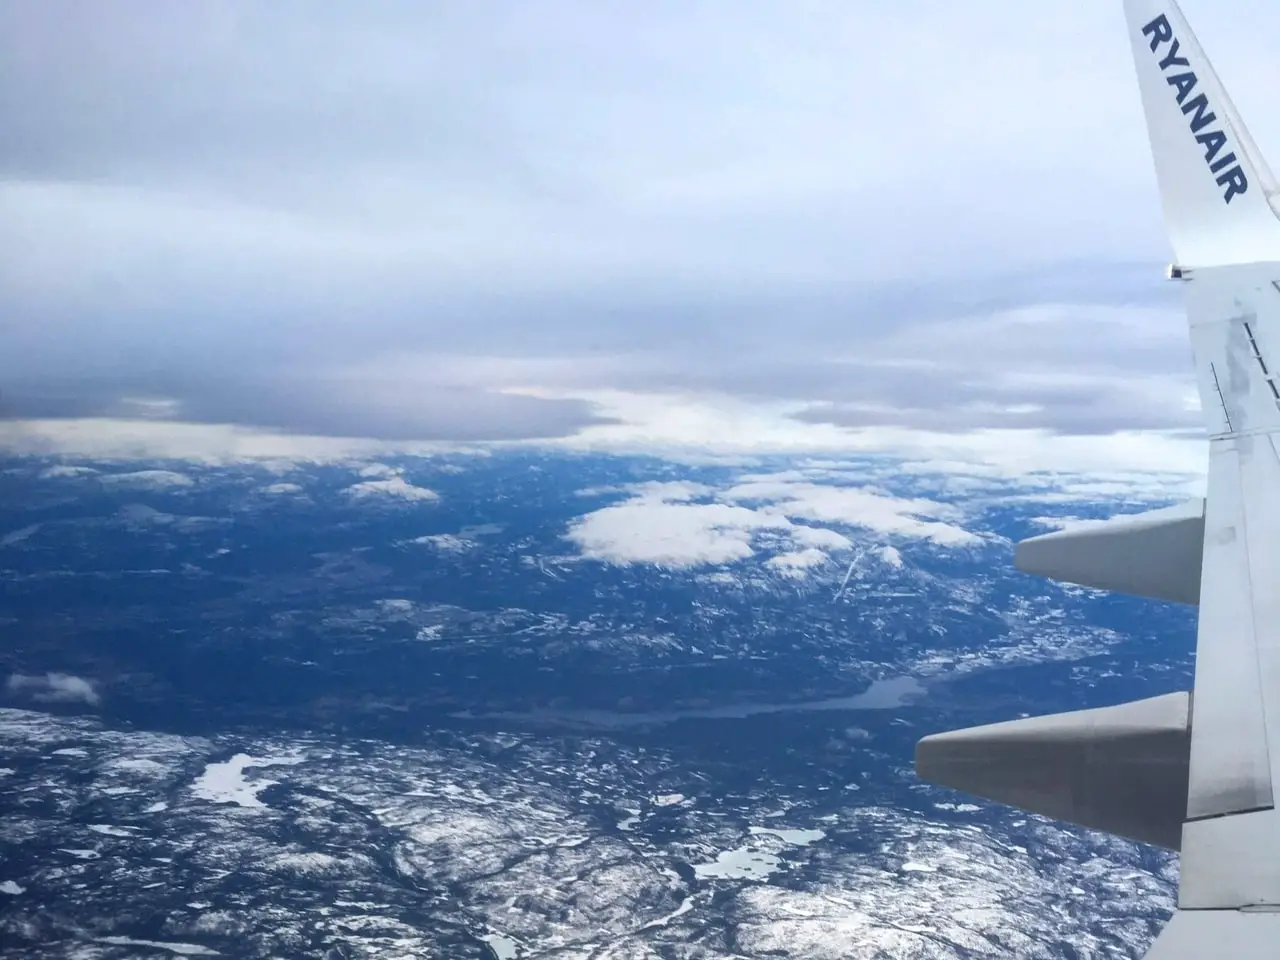 Views from the plane overlooking the Norwegian wilderness.